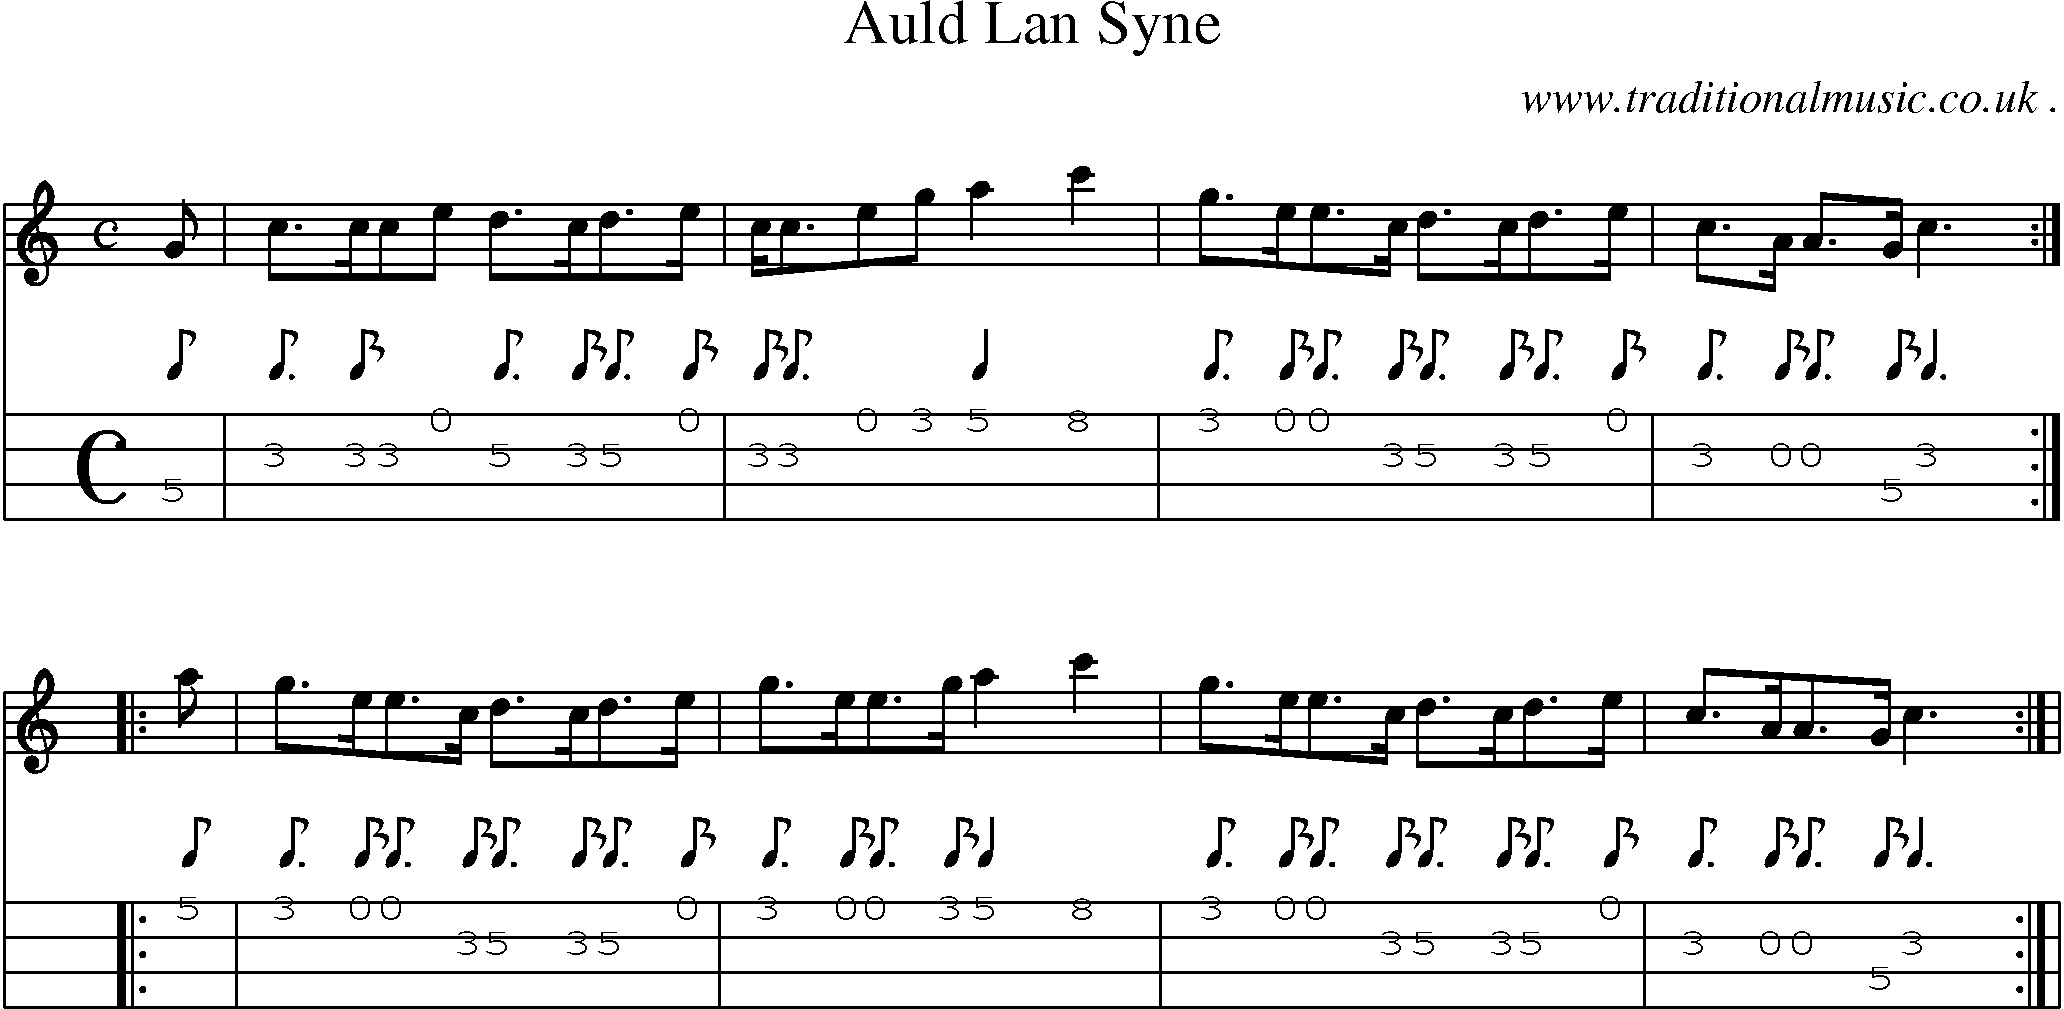 Sheet-Music and Mandolin Tabs for Auld Lan Syne